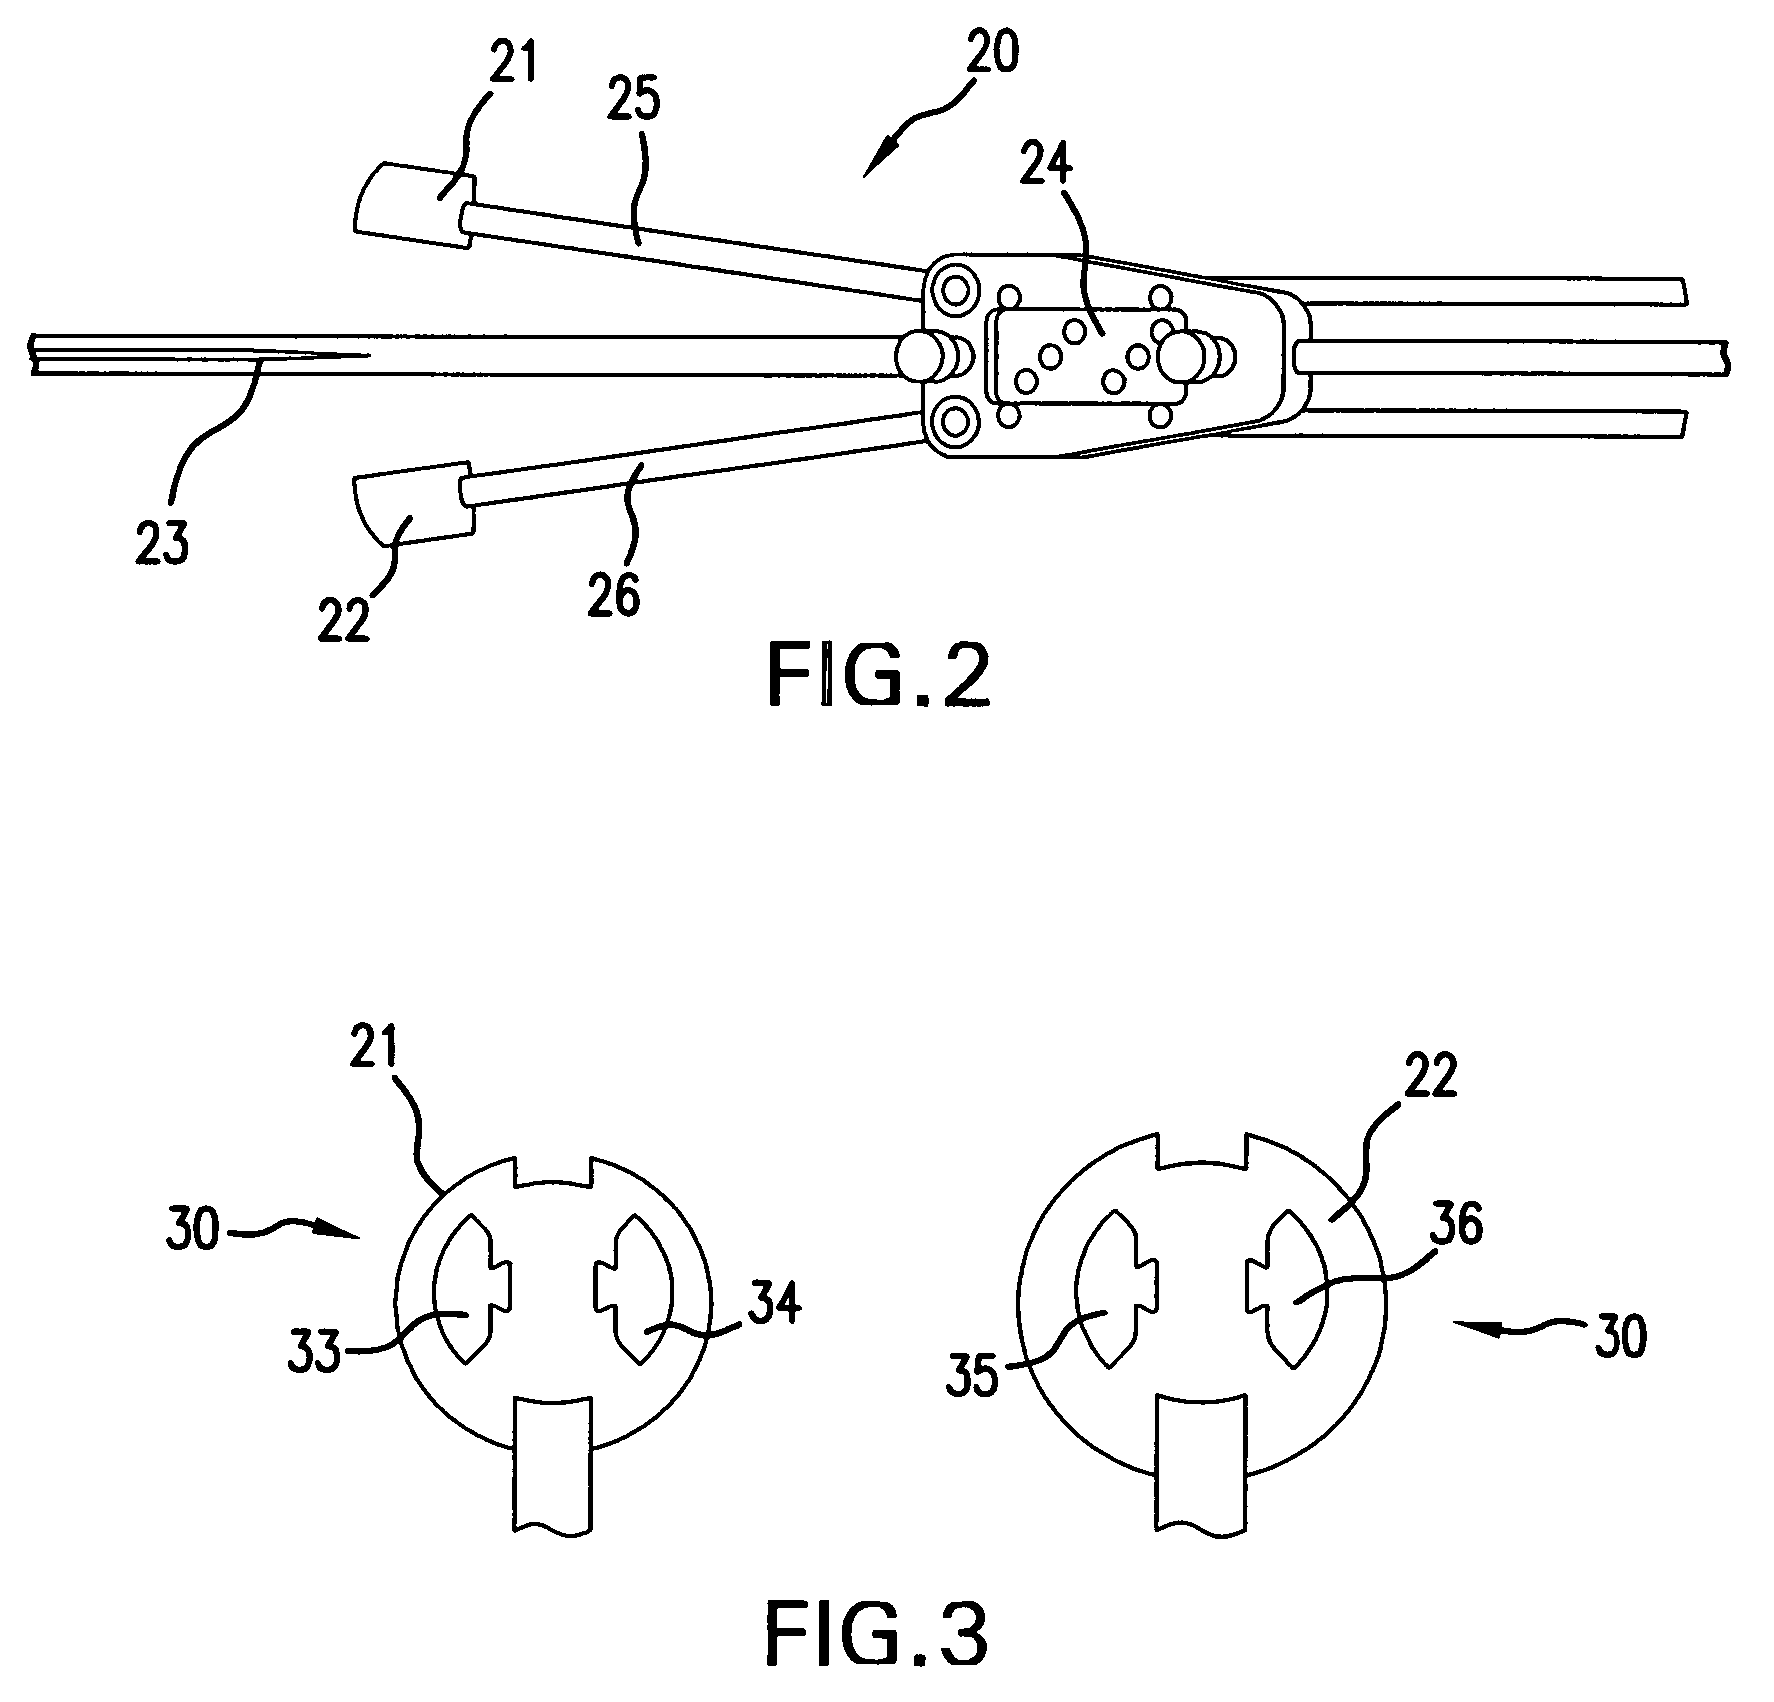 Split-ring brachytherapy device and method for cervical brachytherapy treatment using a split-ring brachytherapy device